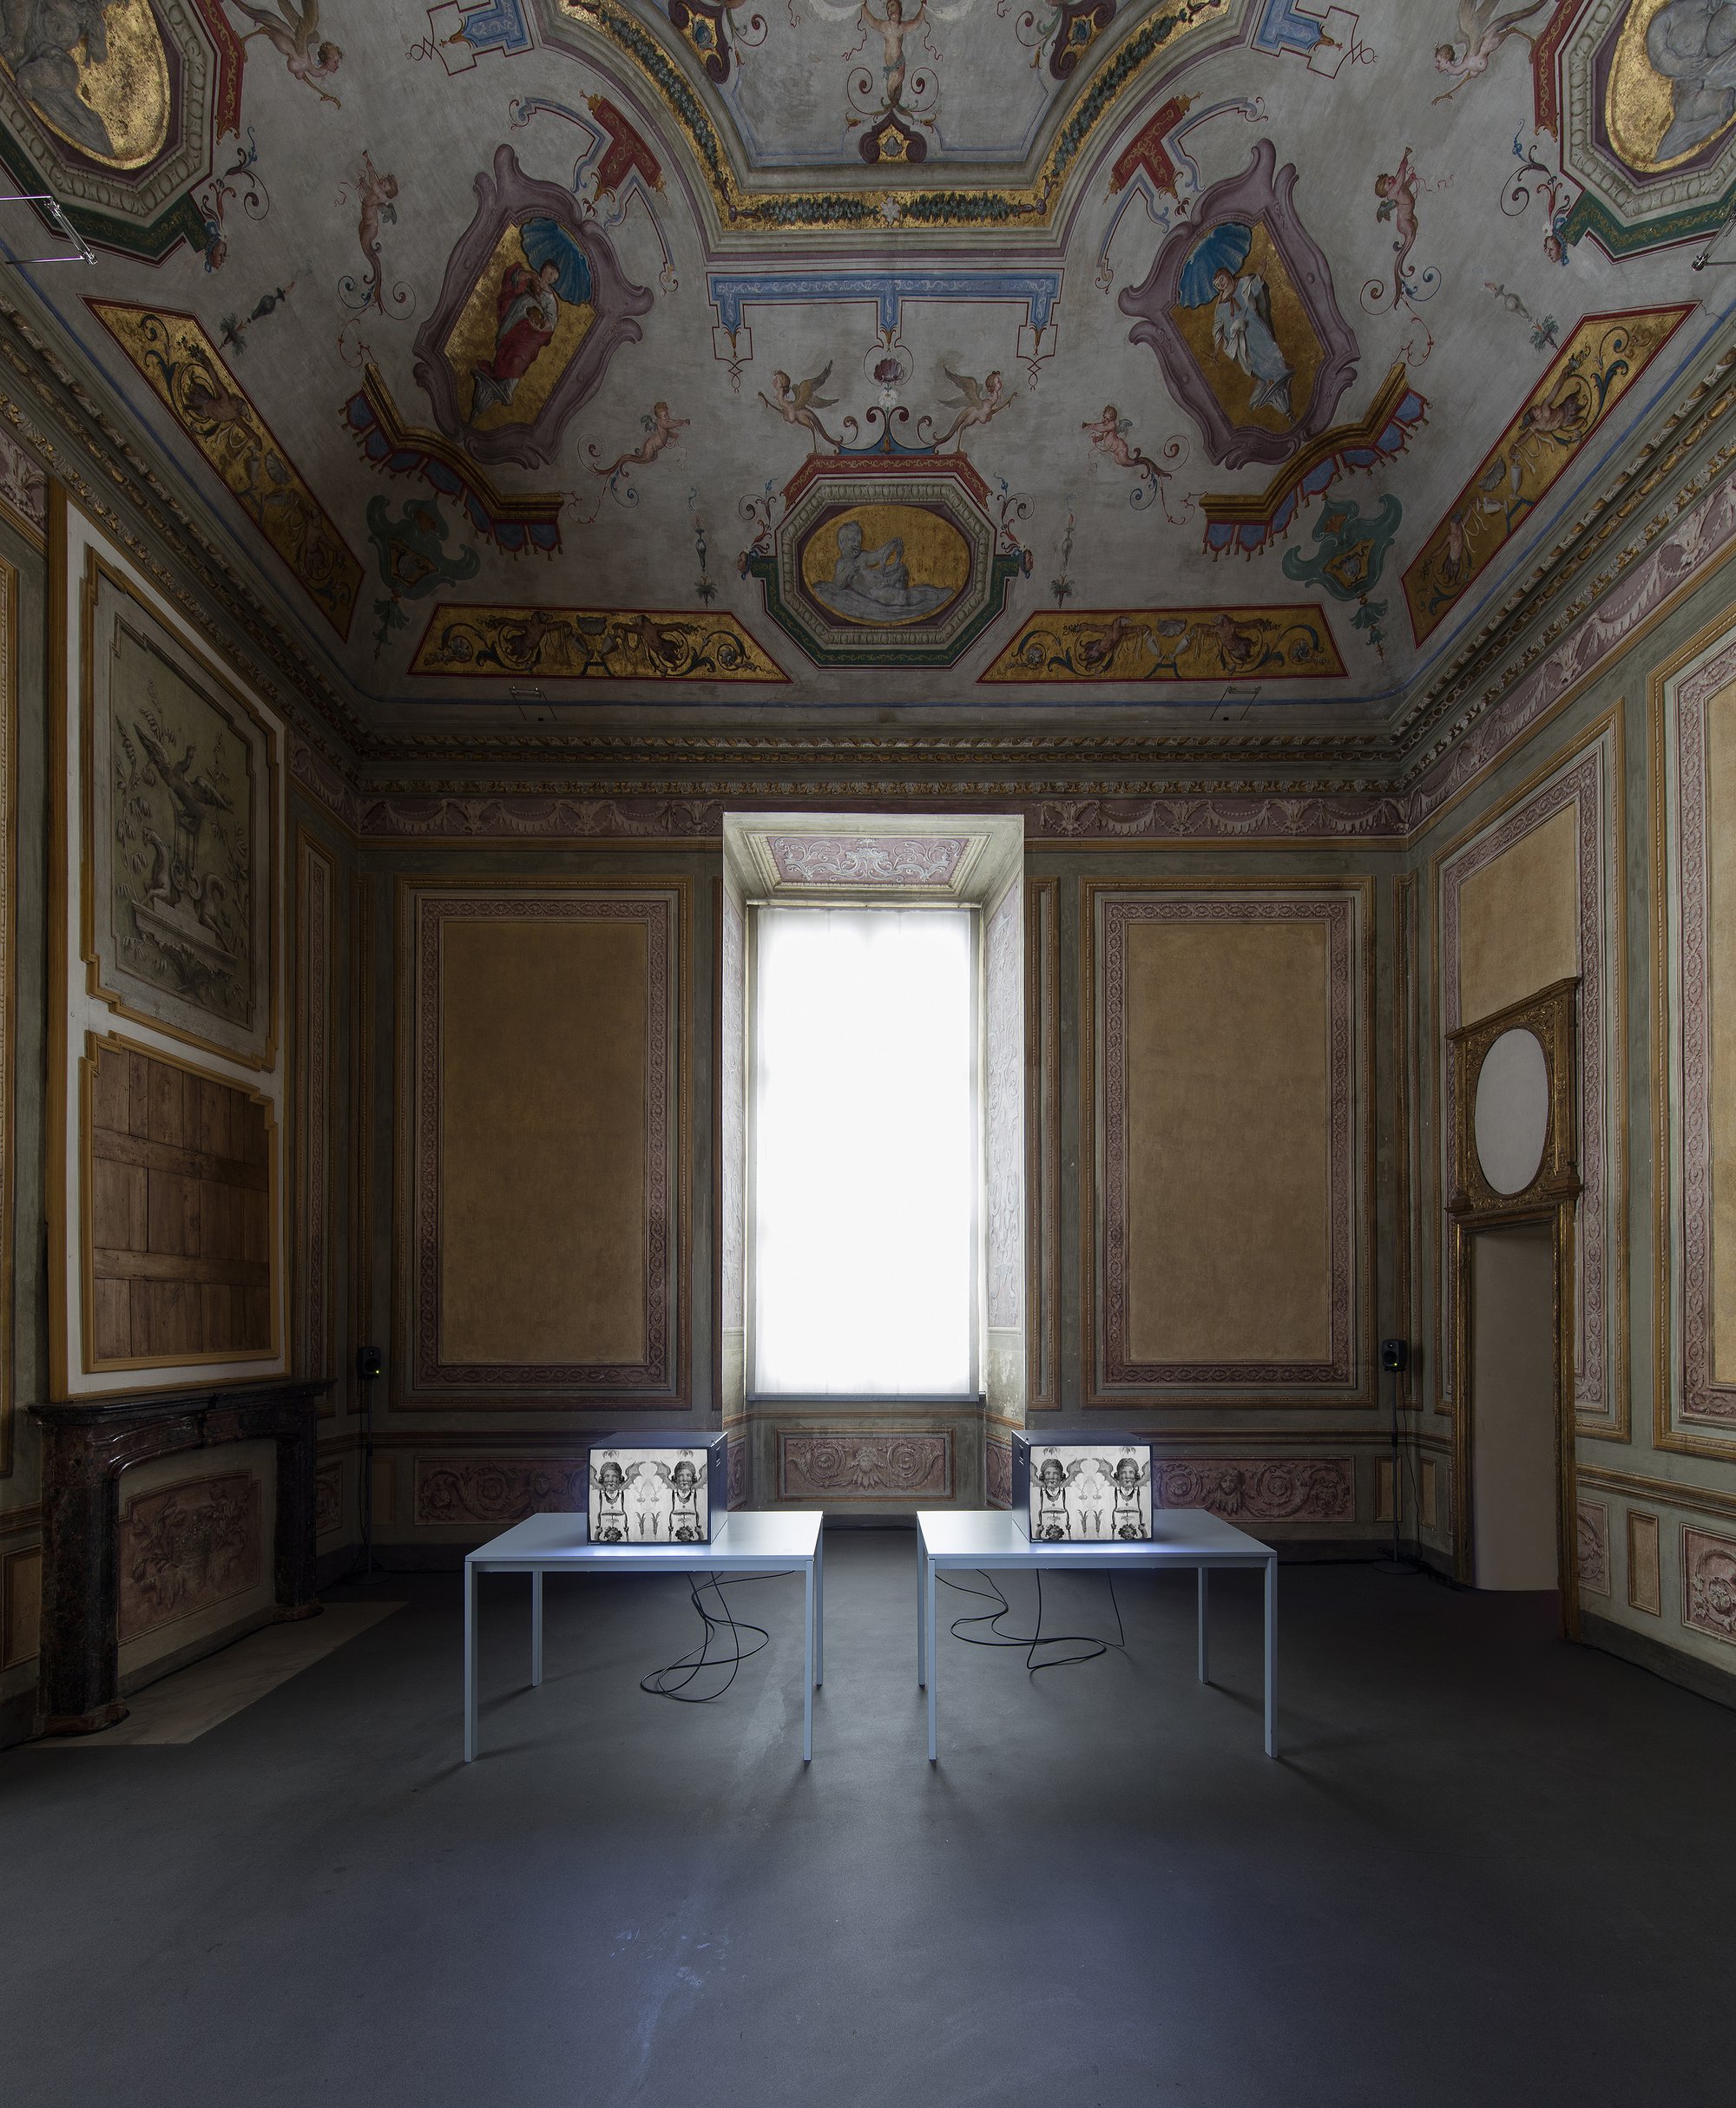 James Richards, Alms for the Birds, two channel video with sound, 2020. Installation view, Alms for the Birds, Castello di Rivoli, Turin, 2020